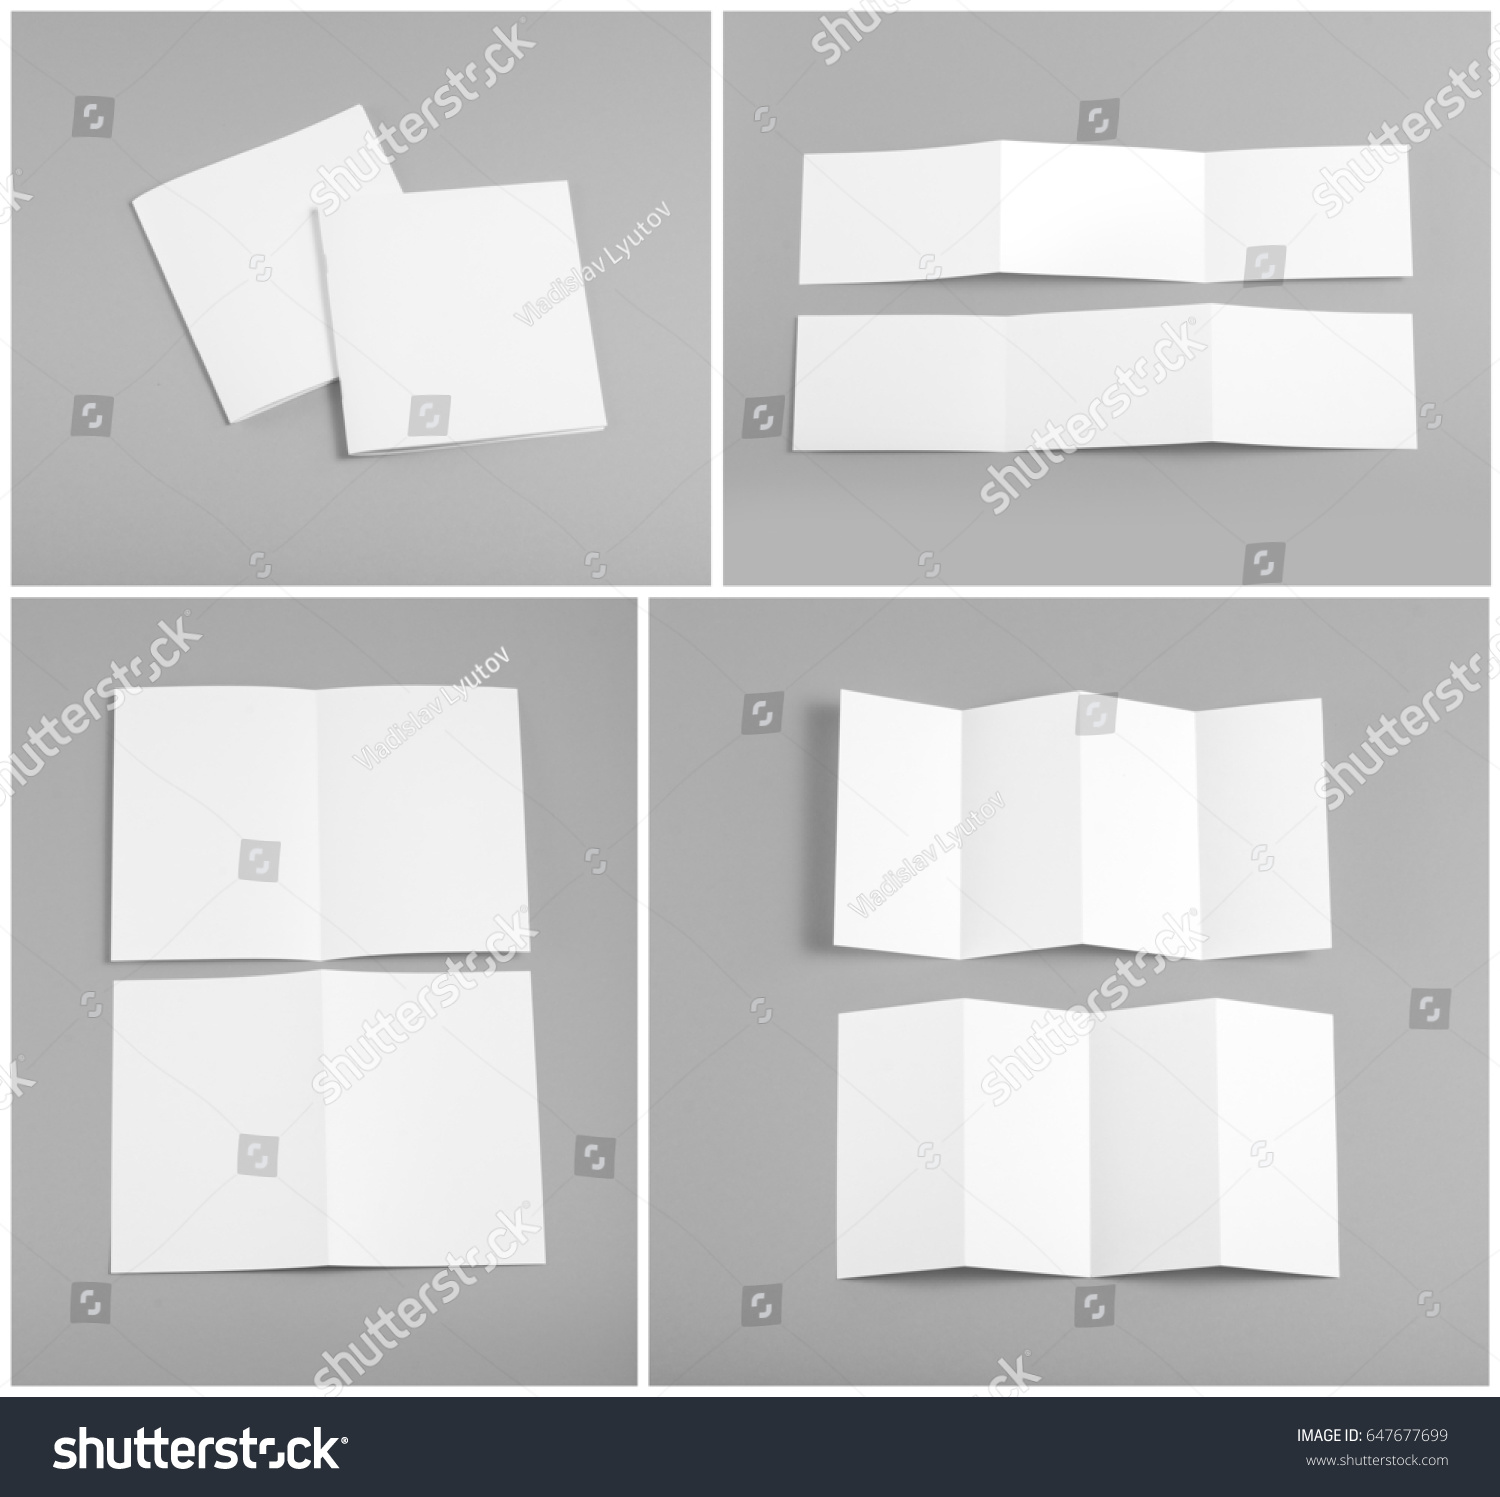 Identity design, corporate templates, company style, set of booklets, blank white folding paper flyer #647677699